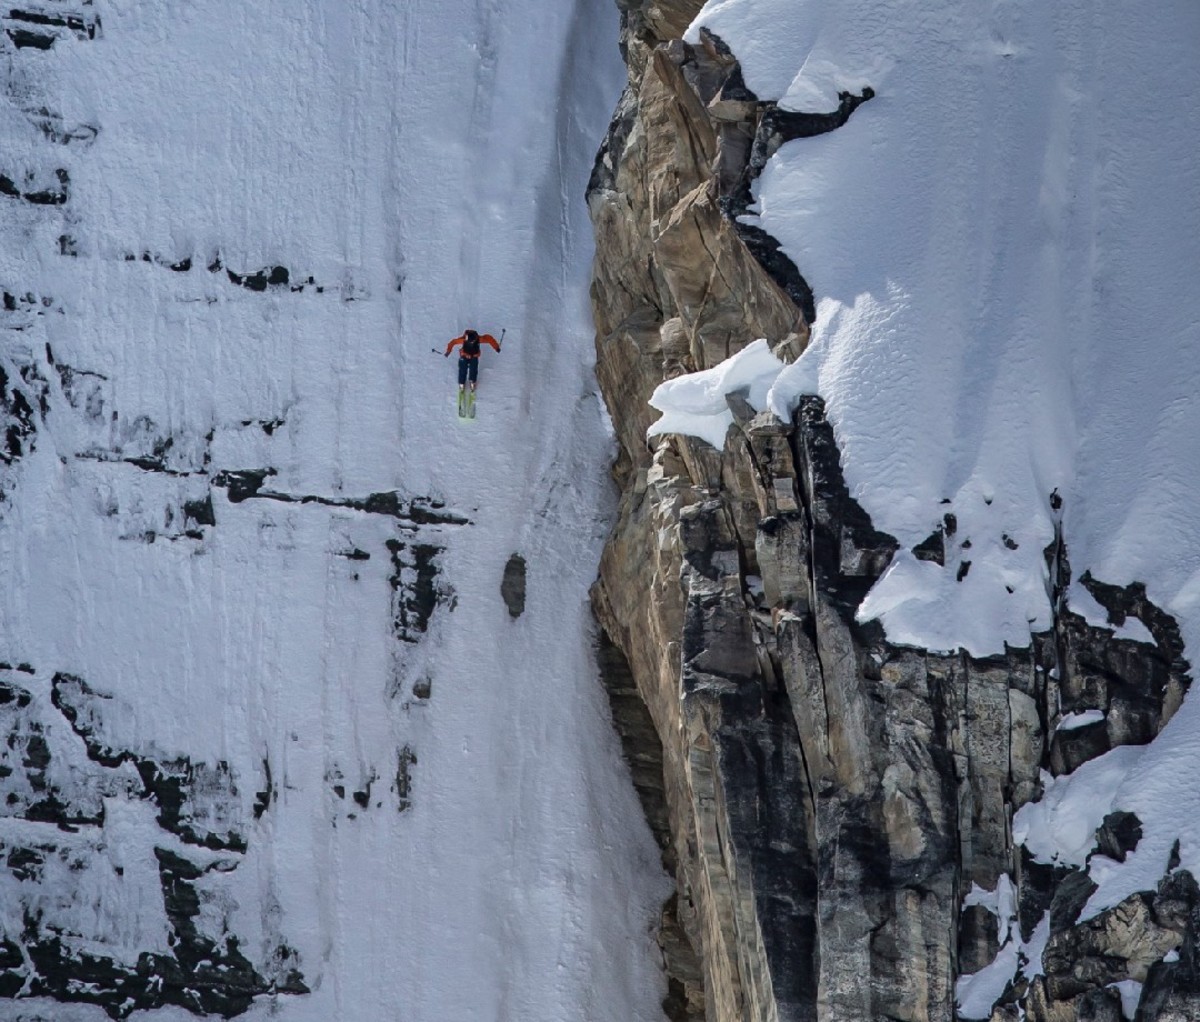 Sam Anthamatten skiing down a near vertical slope of Laila Peak in the documentary La Liste: Everything or Nothing